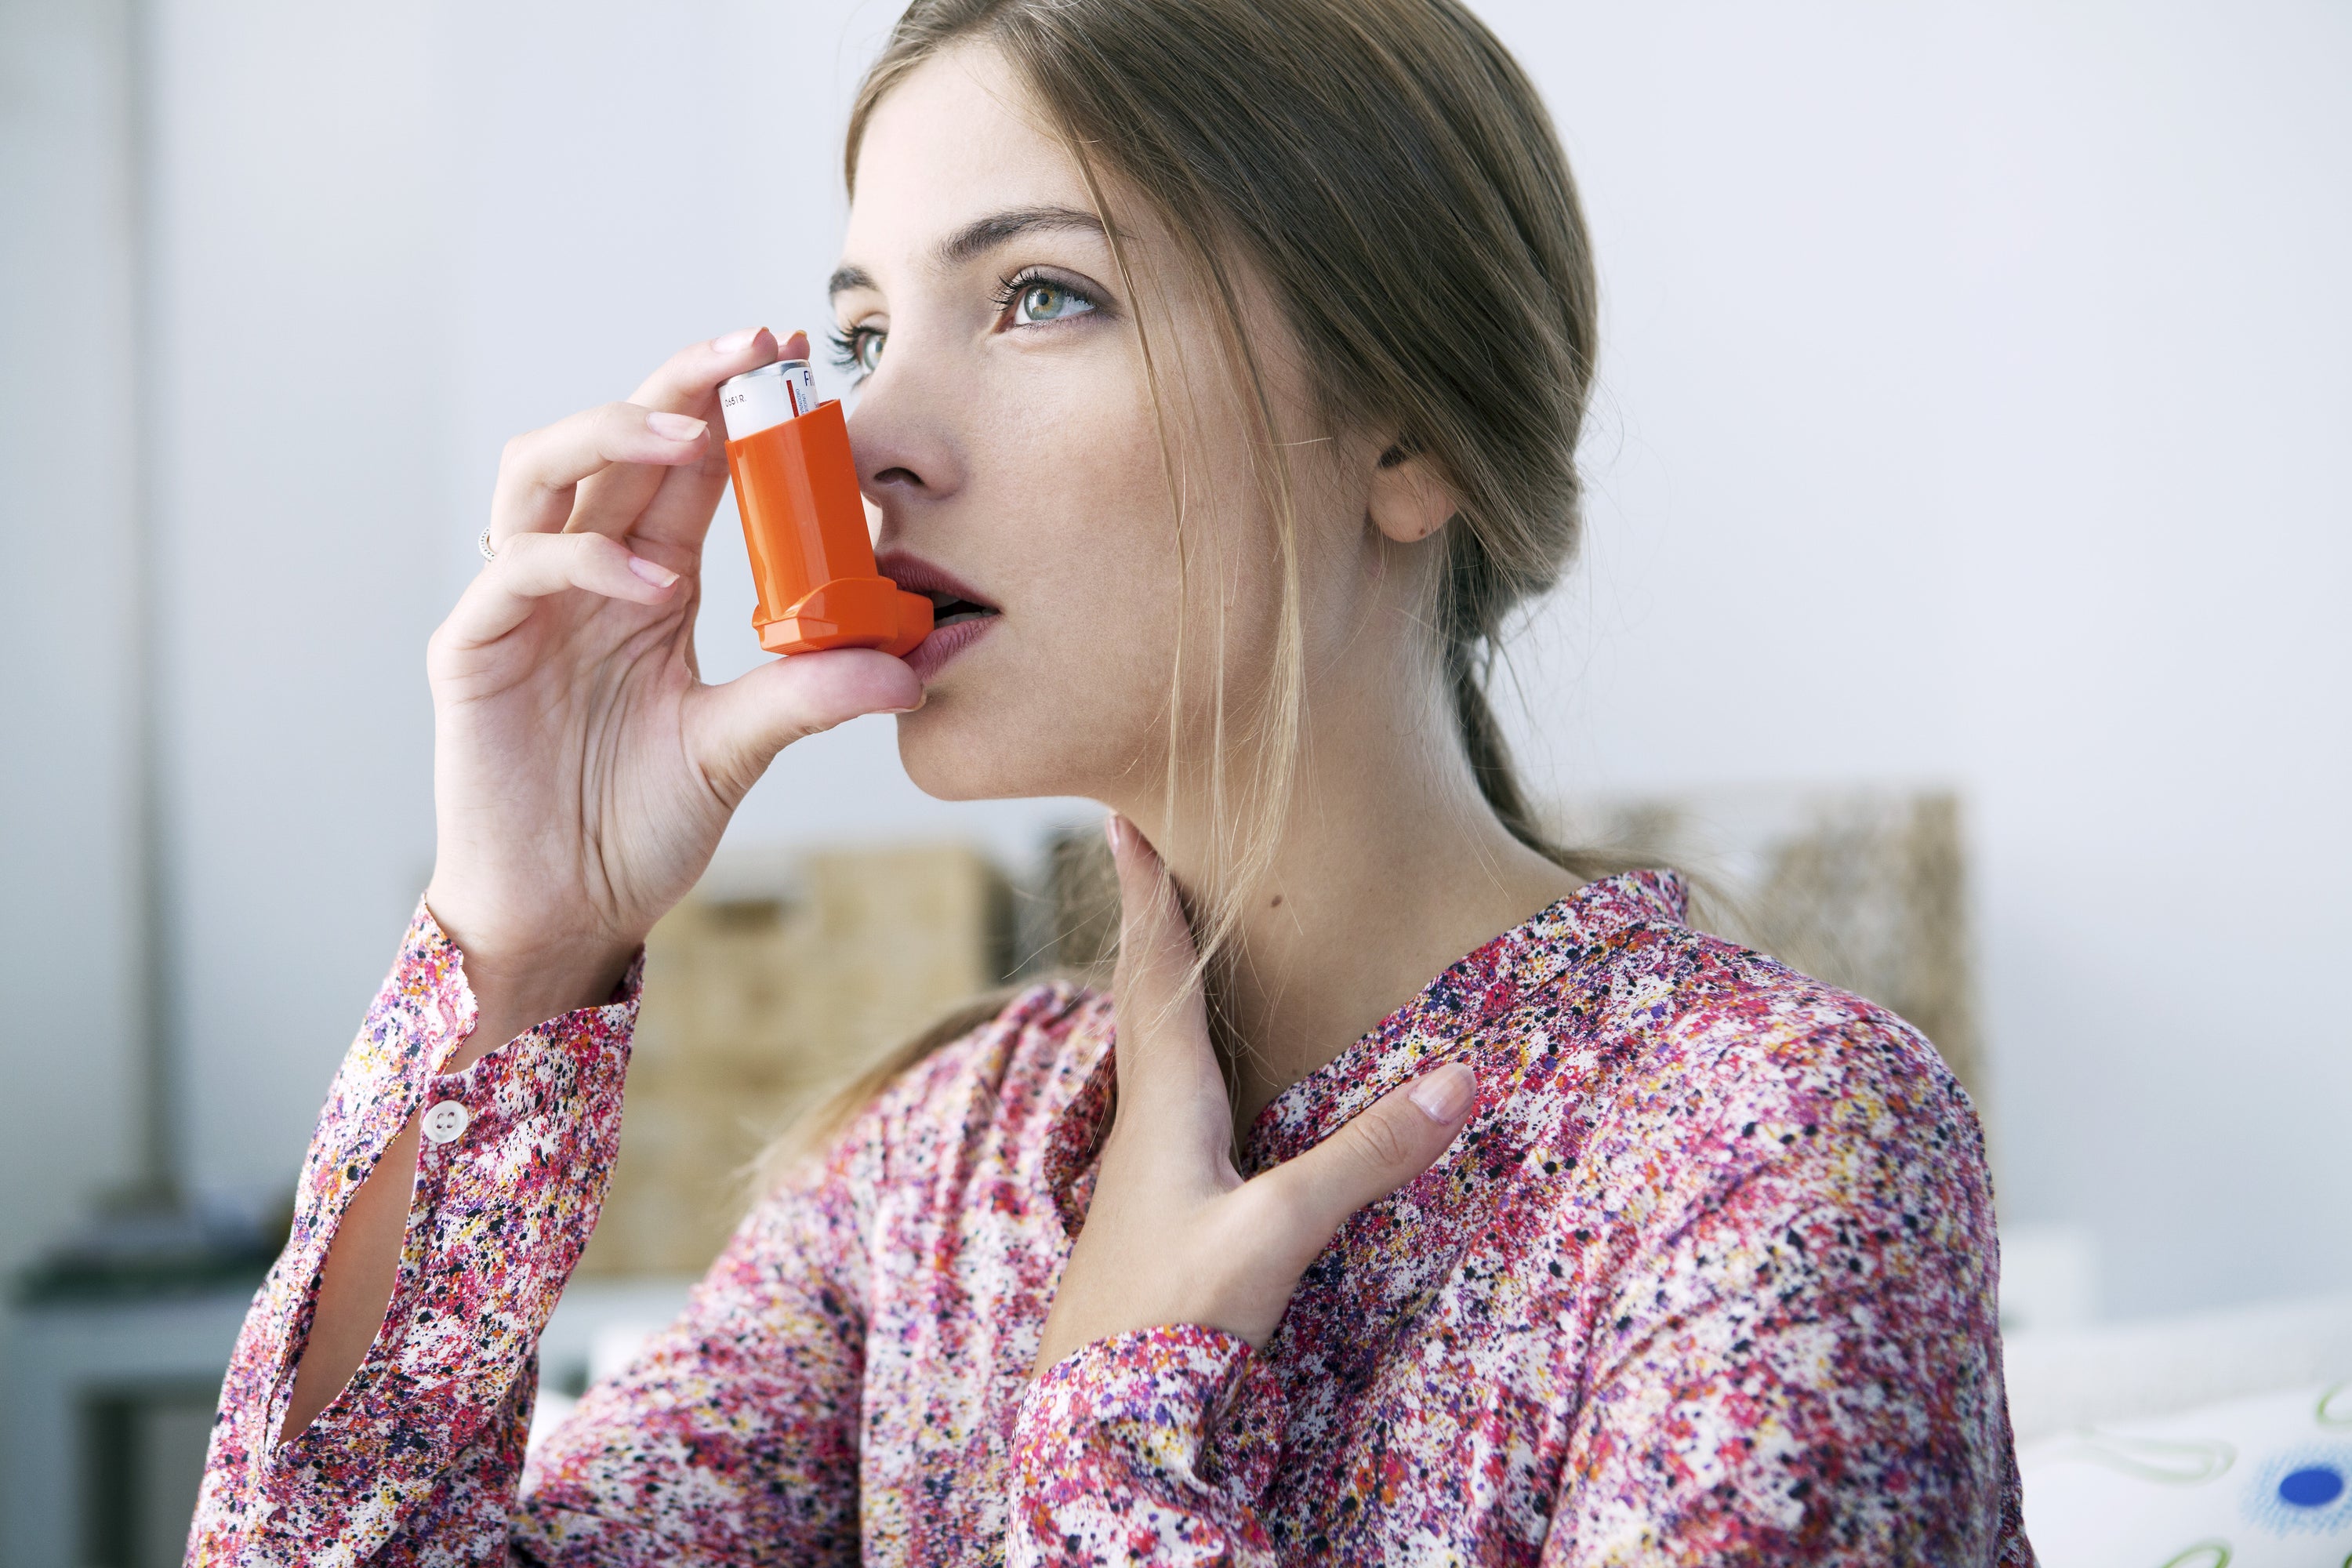 Image of a woman with asthma using an inhaler, managing her respiratory condition with proper medical care.